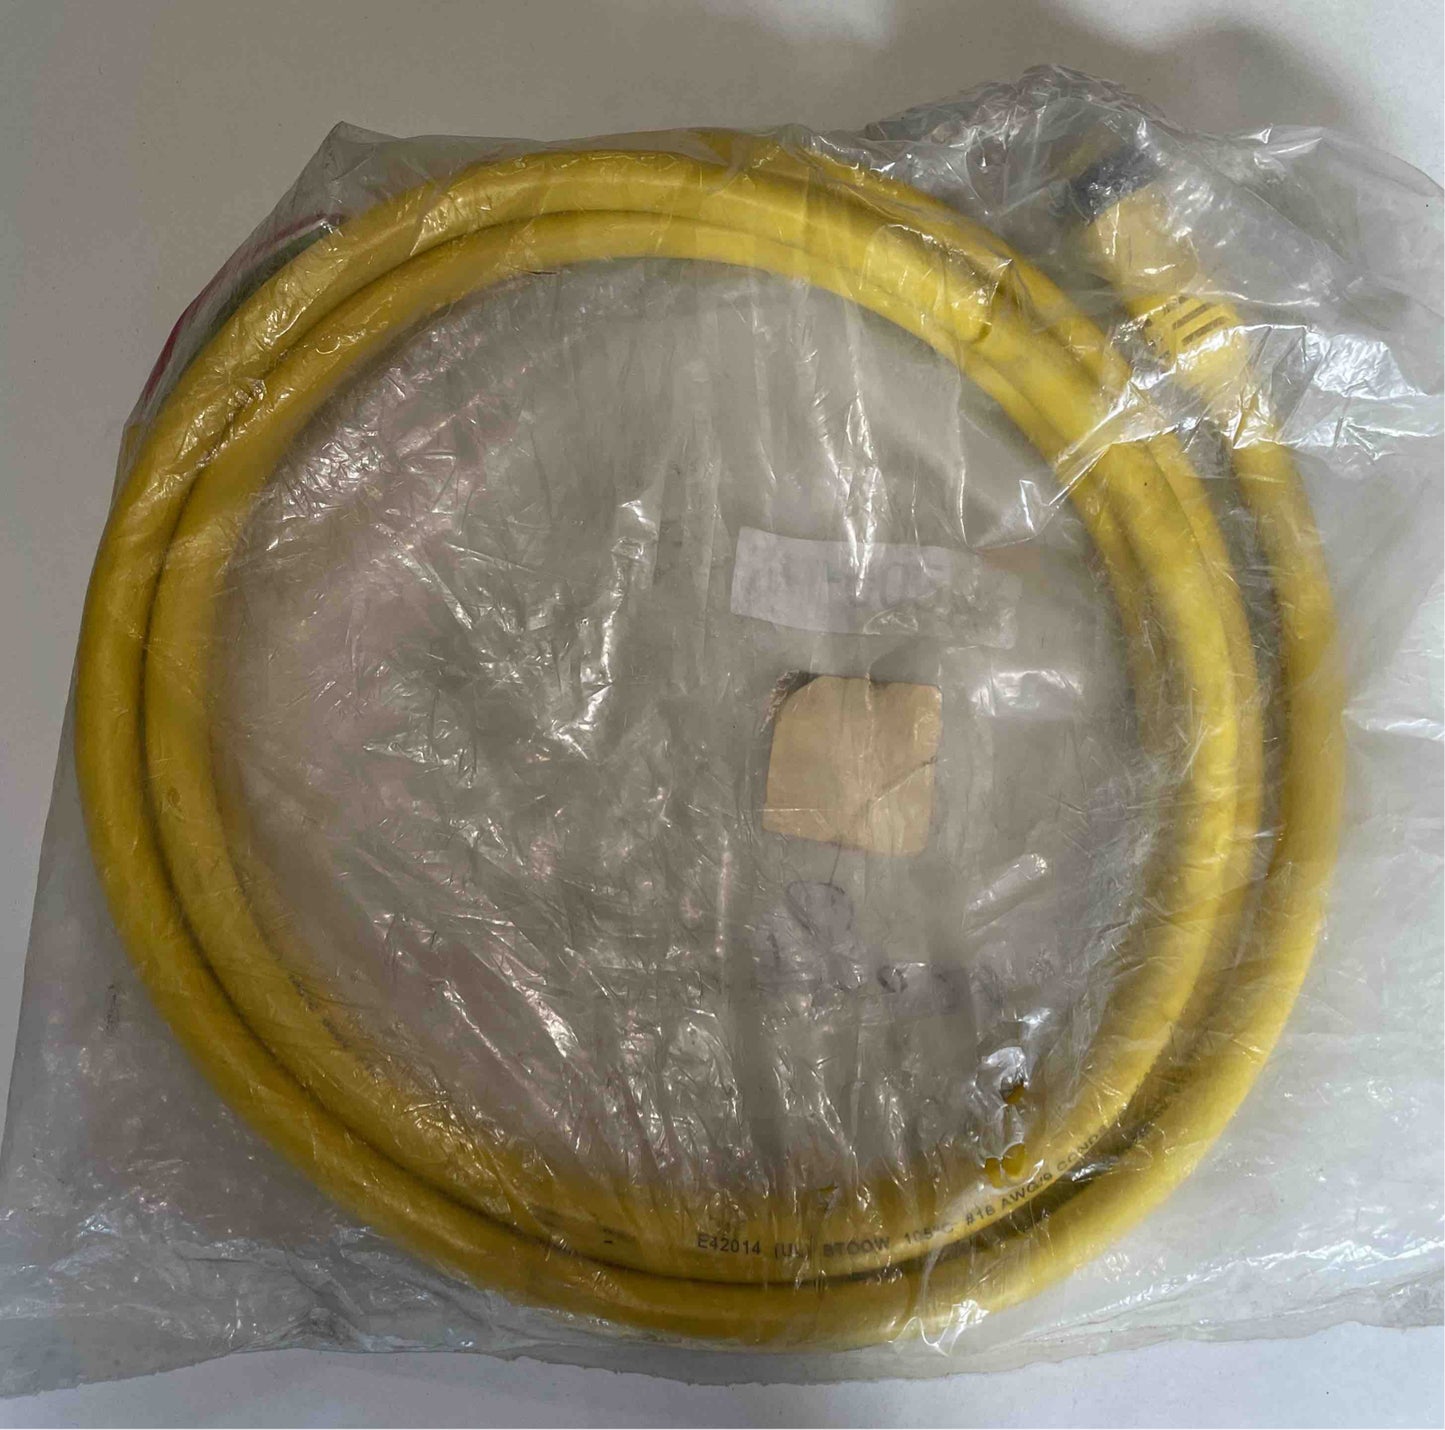 EH-0020 

Cable
EH-0020, 51210 